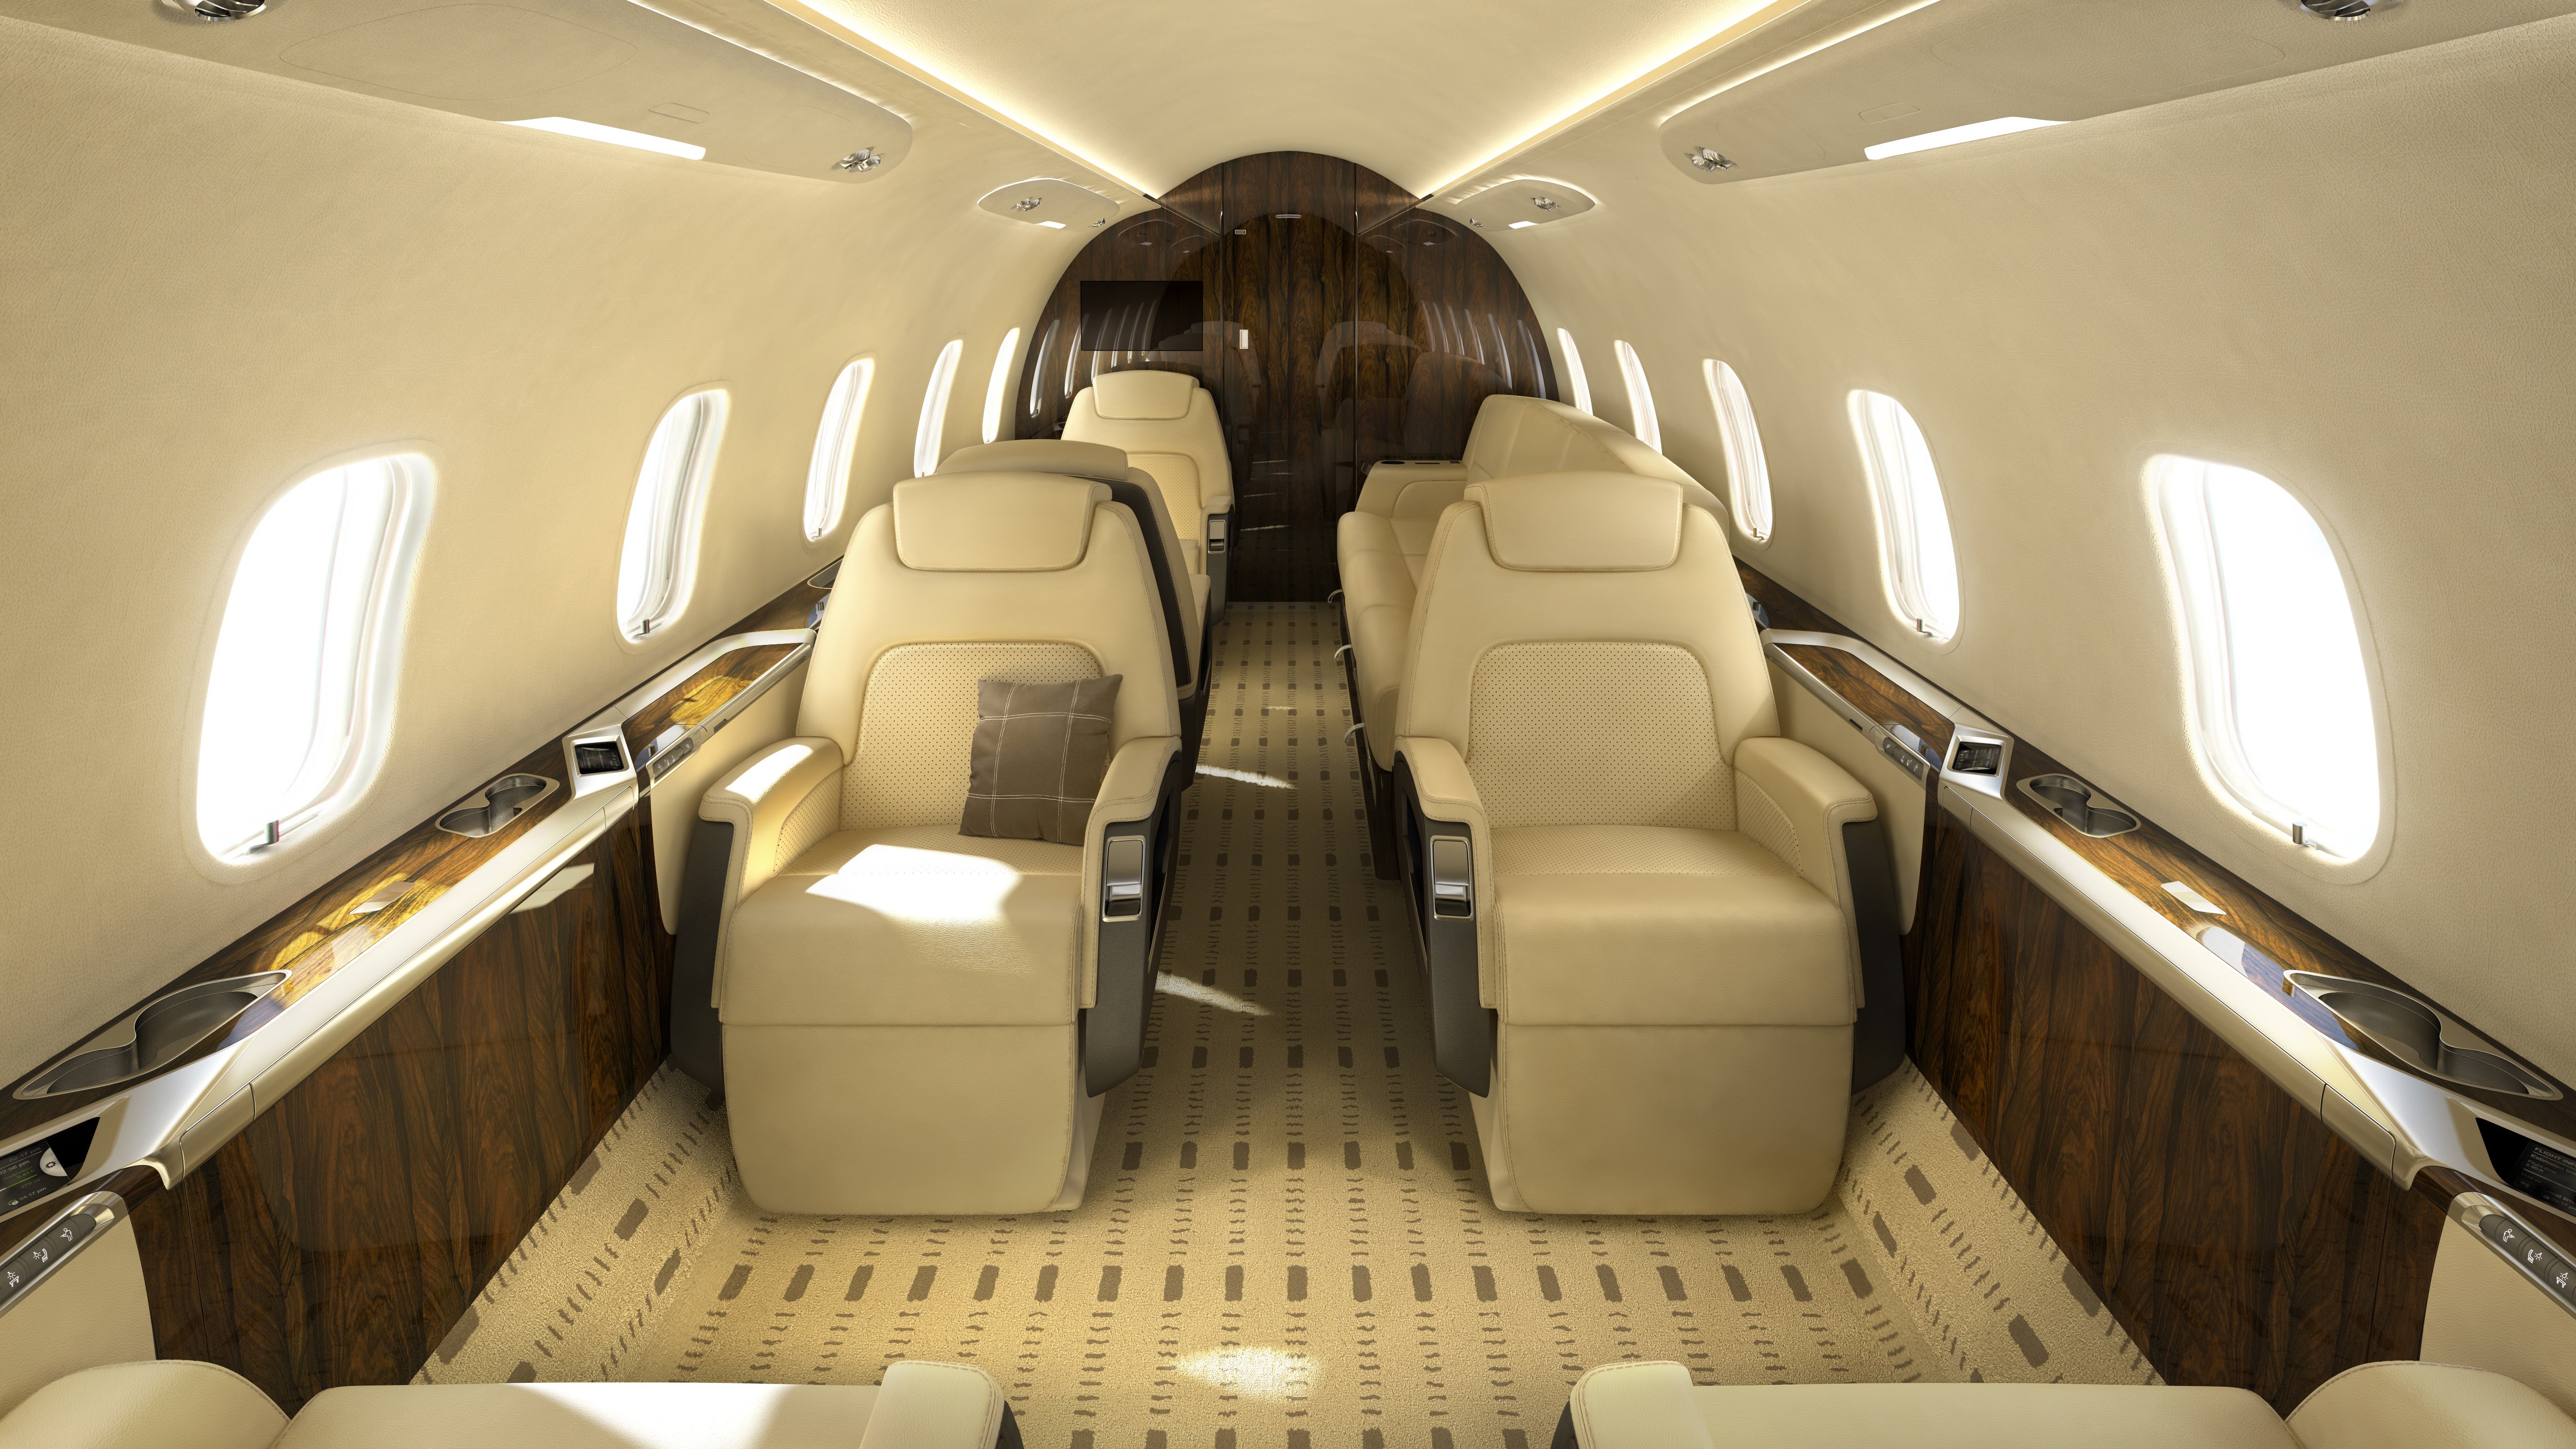 Global Jet Capital’s Private Aircraft Financing Blog